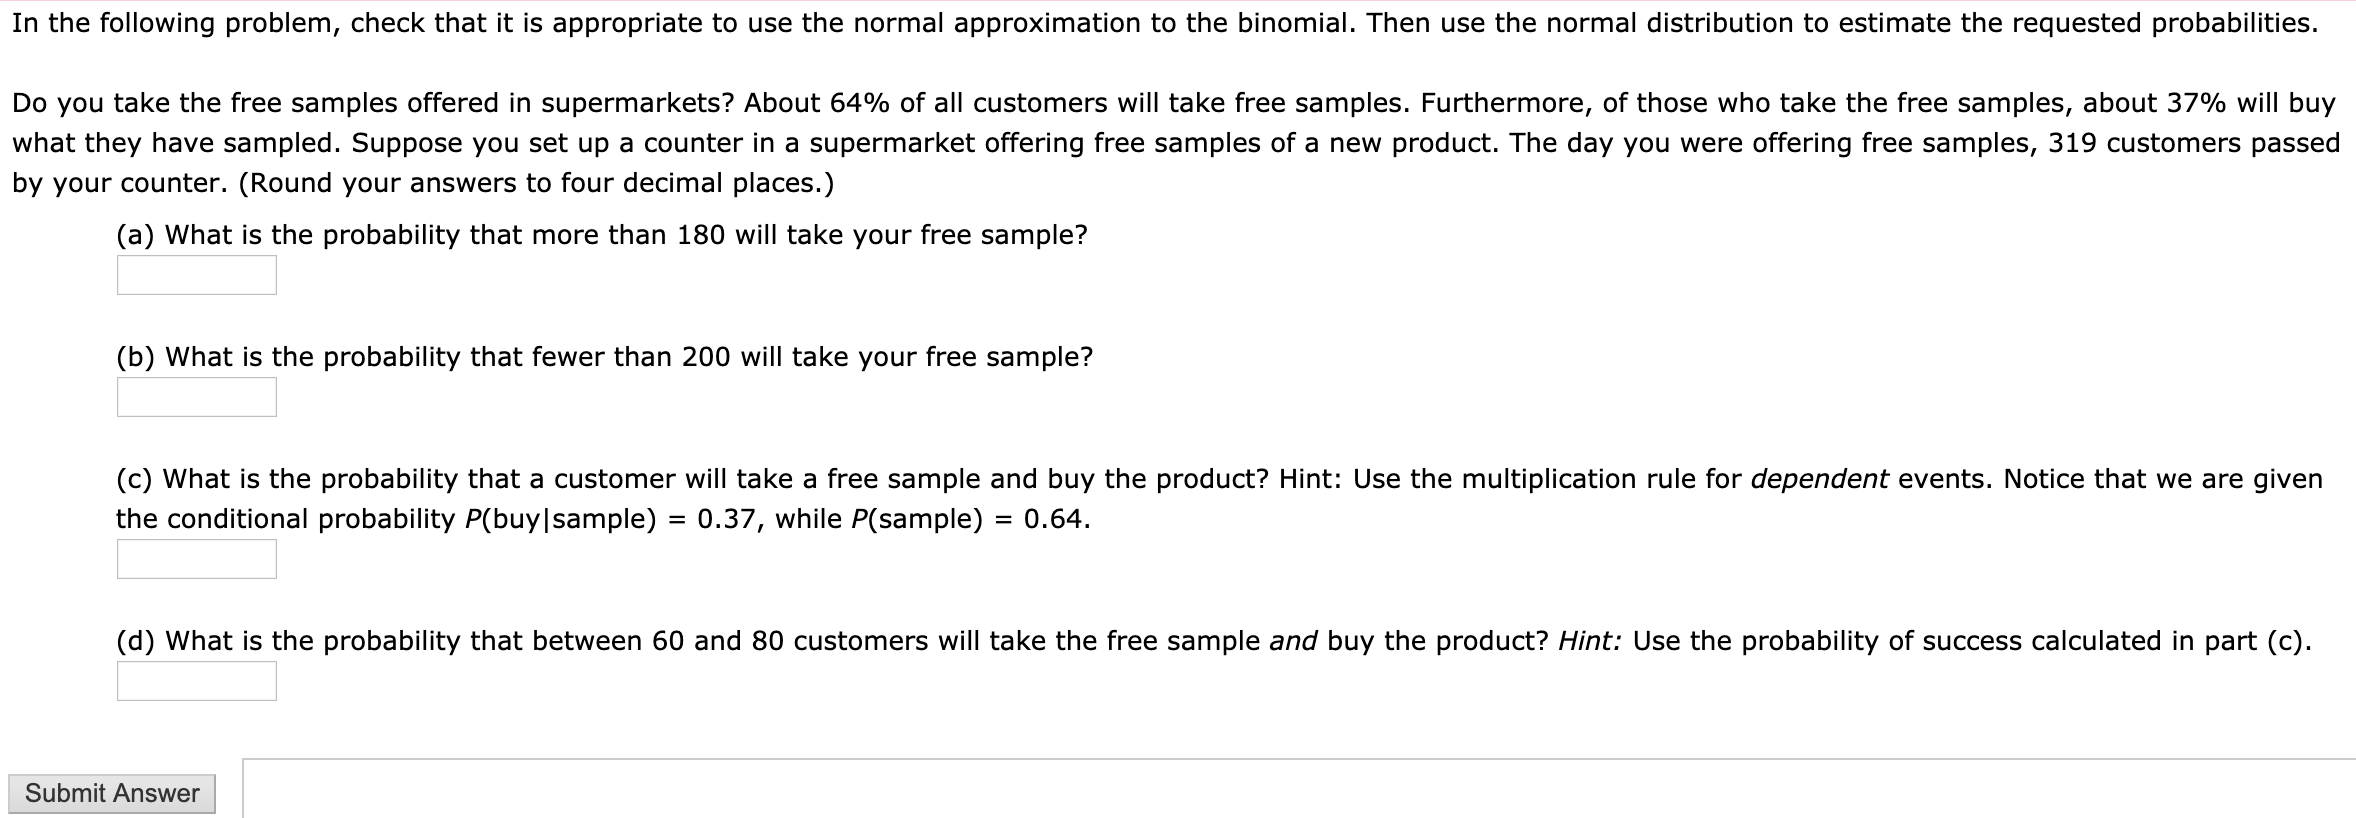 In the following problem, check that it is appropriate to use the normal approximation to the binomial. Then use the normal distribution to estimate the requested probabilities.
Do you take the free samples offered in supermarkets? About 64% of all customers will take free samples. Furthermore, of those who take the free samples, about 37% will buy
what they have sampled. Suppose you set up a counter in a supermarket offering free samples of a new product. The day you were offering free samples, 319 customers passed
by your counter. (Round your answers to four decimal places.)
(a) What is the probability that more than 180 will take your free sample?
(b) What is the probability that fewer than 200 will take your free sample?
(c) What is the probability that a customer will take a free sample and buy the product? Hint: Use the multiplication rule for dependent events. Notice that we are given
the conditional probability P(buy|sample) = 0.37, while P(sample) = 0.64.
%3D
(d) What is the probability that between 60 and 80 customers will take the free sample and buy the product? Hint: Use the probability of success calculated in part (c).
Submit Answer
